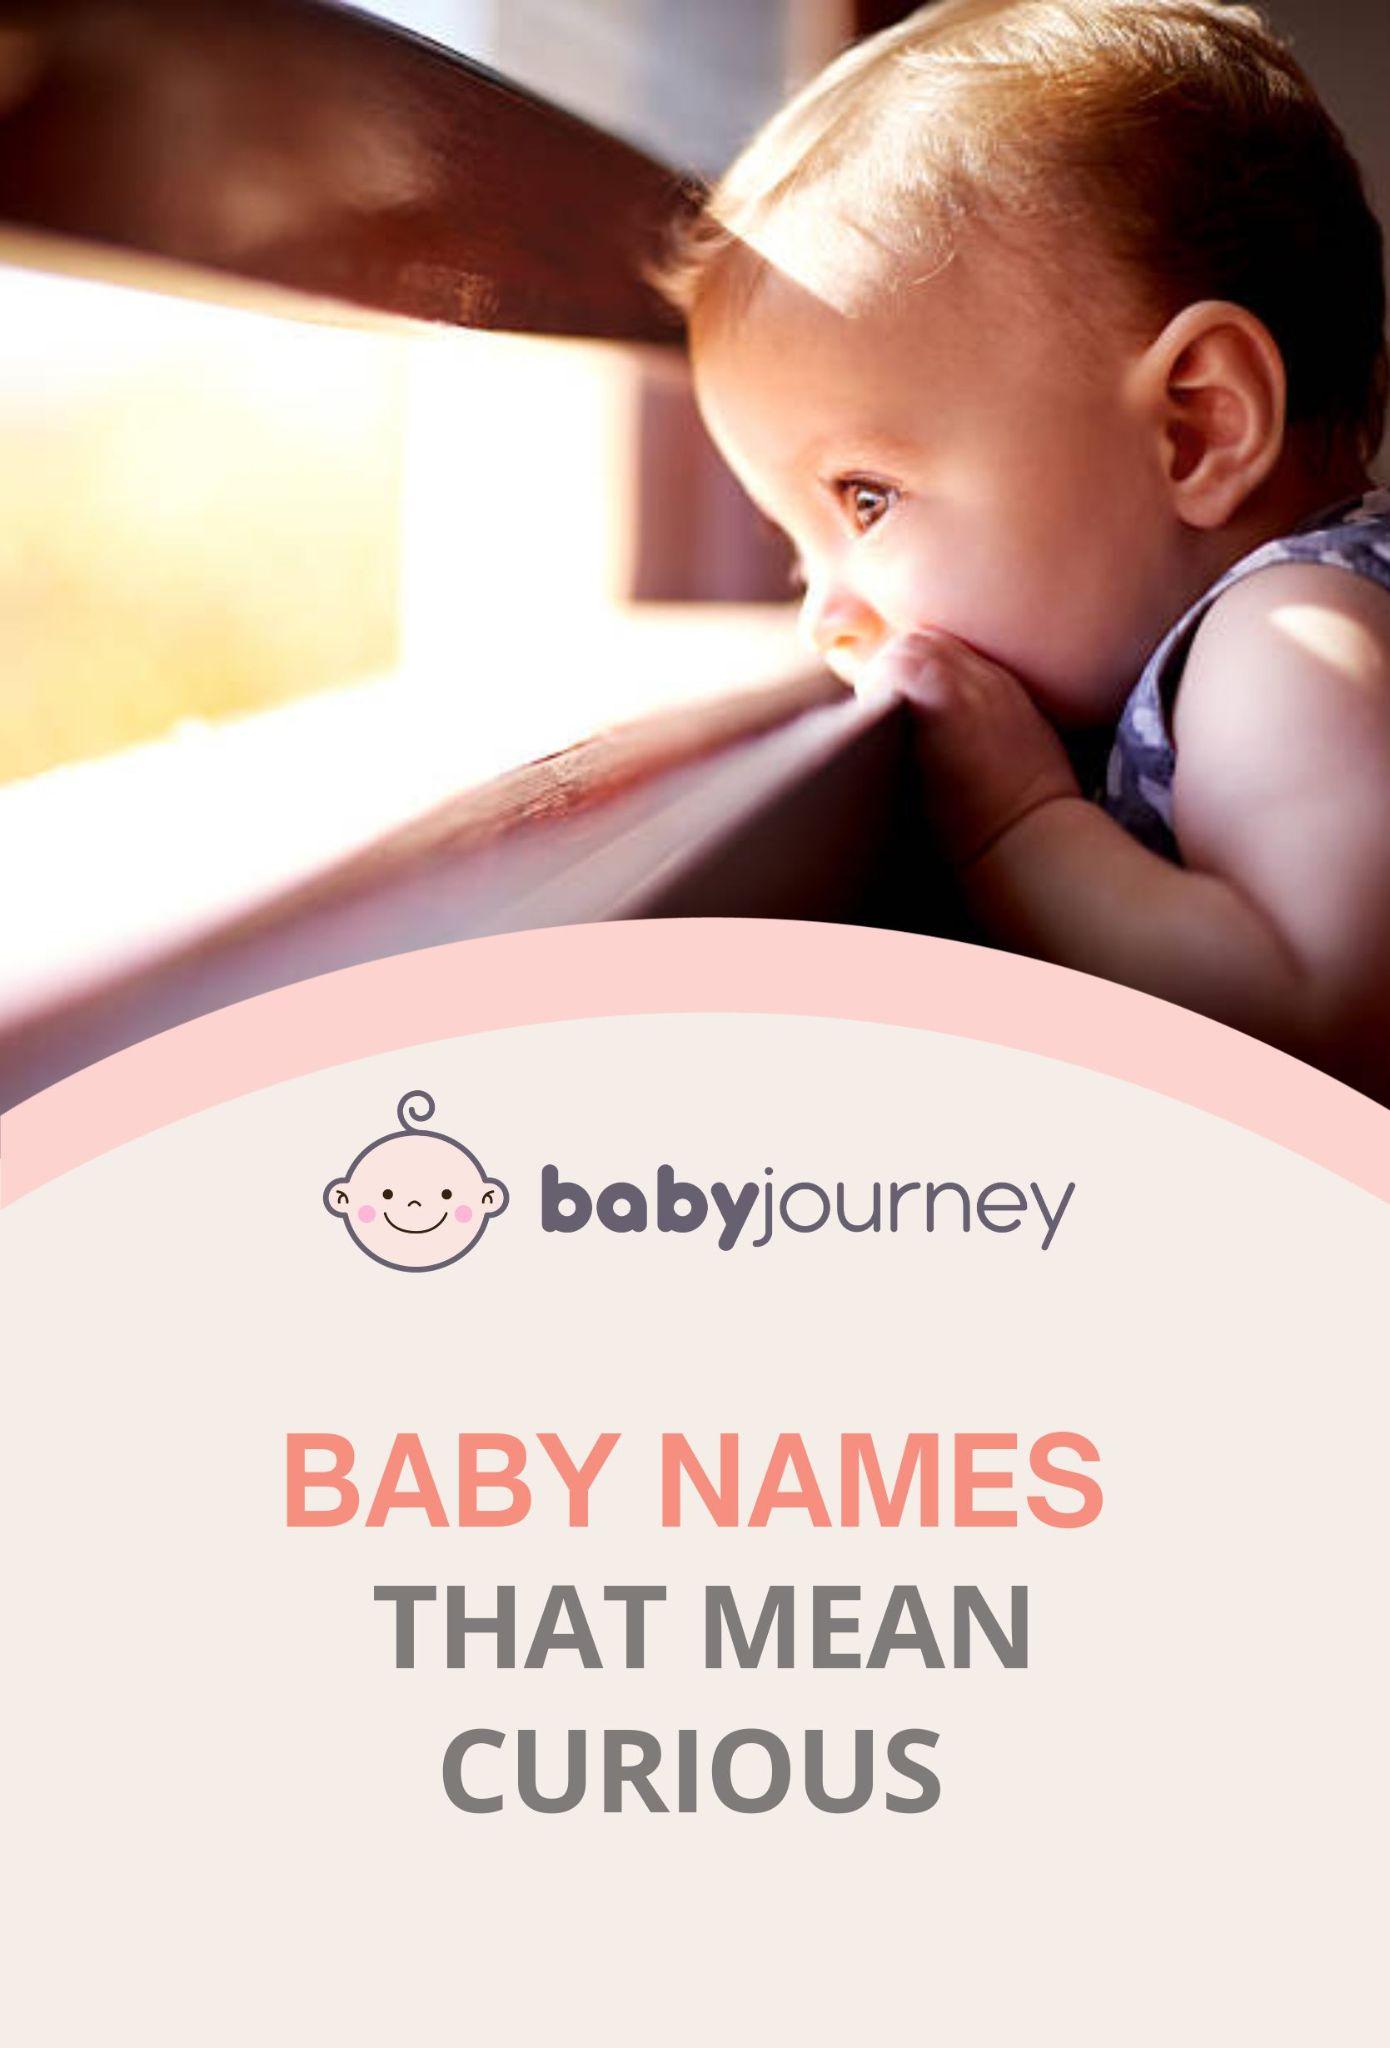 Baby Names That Mean Curious pinterest - Baby Journey